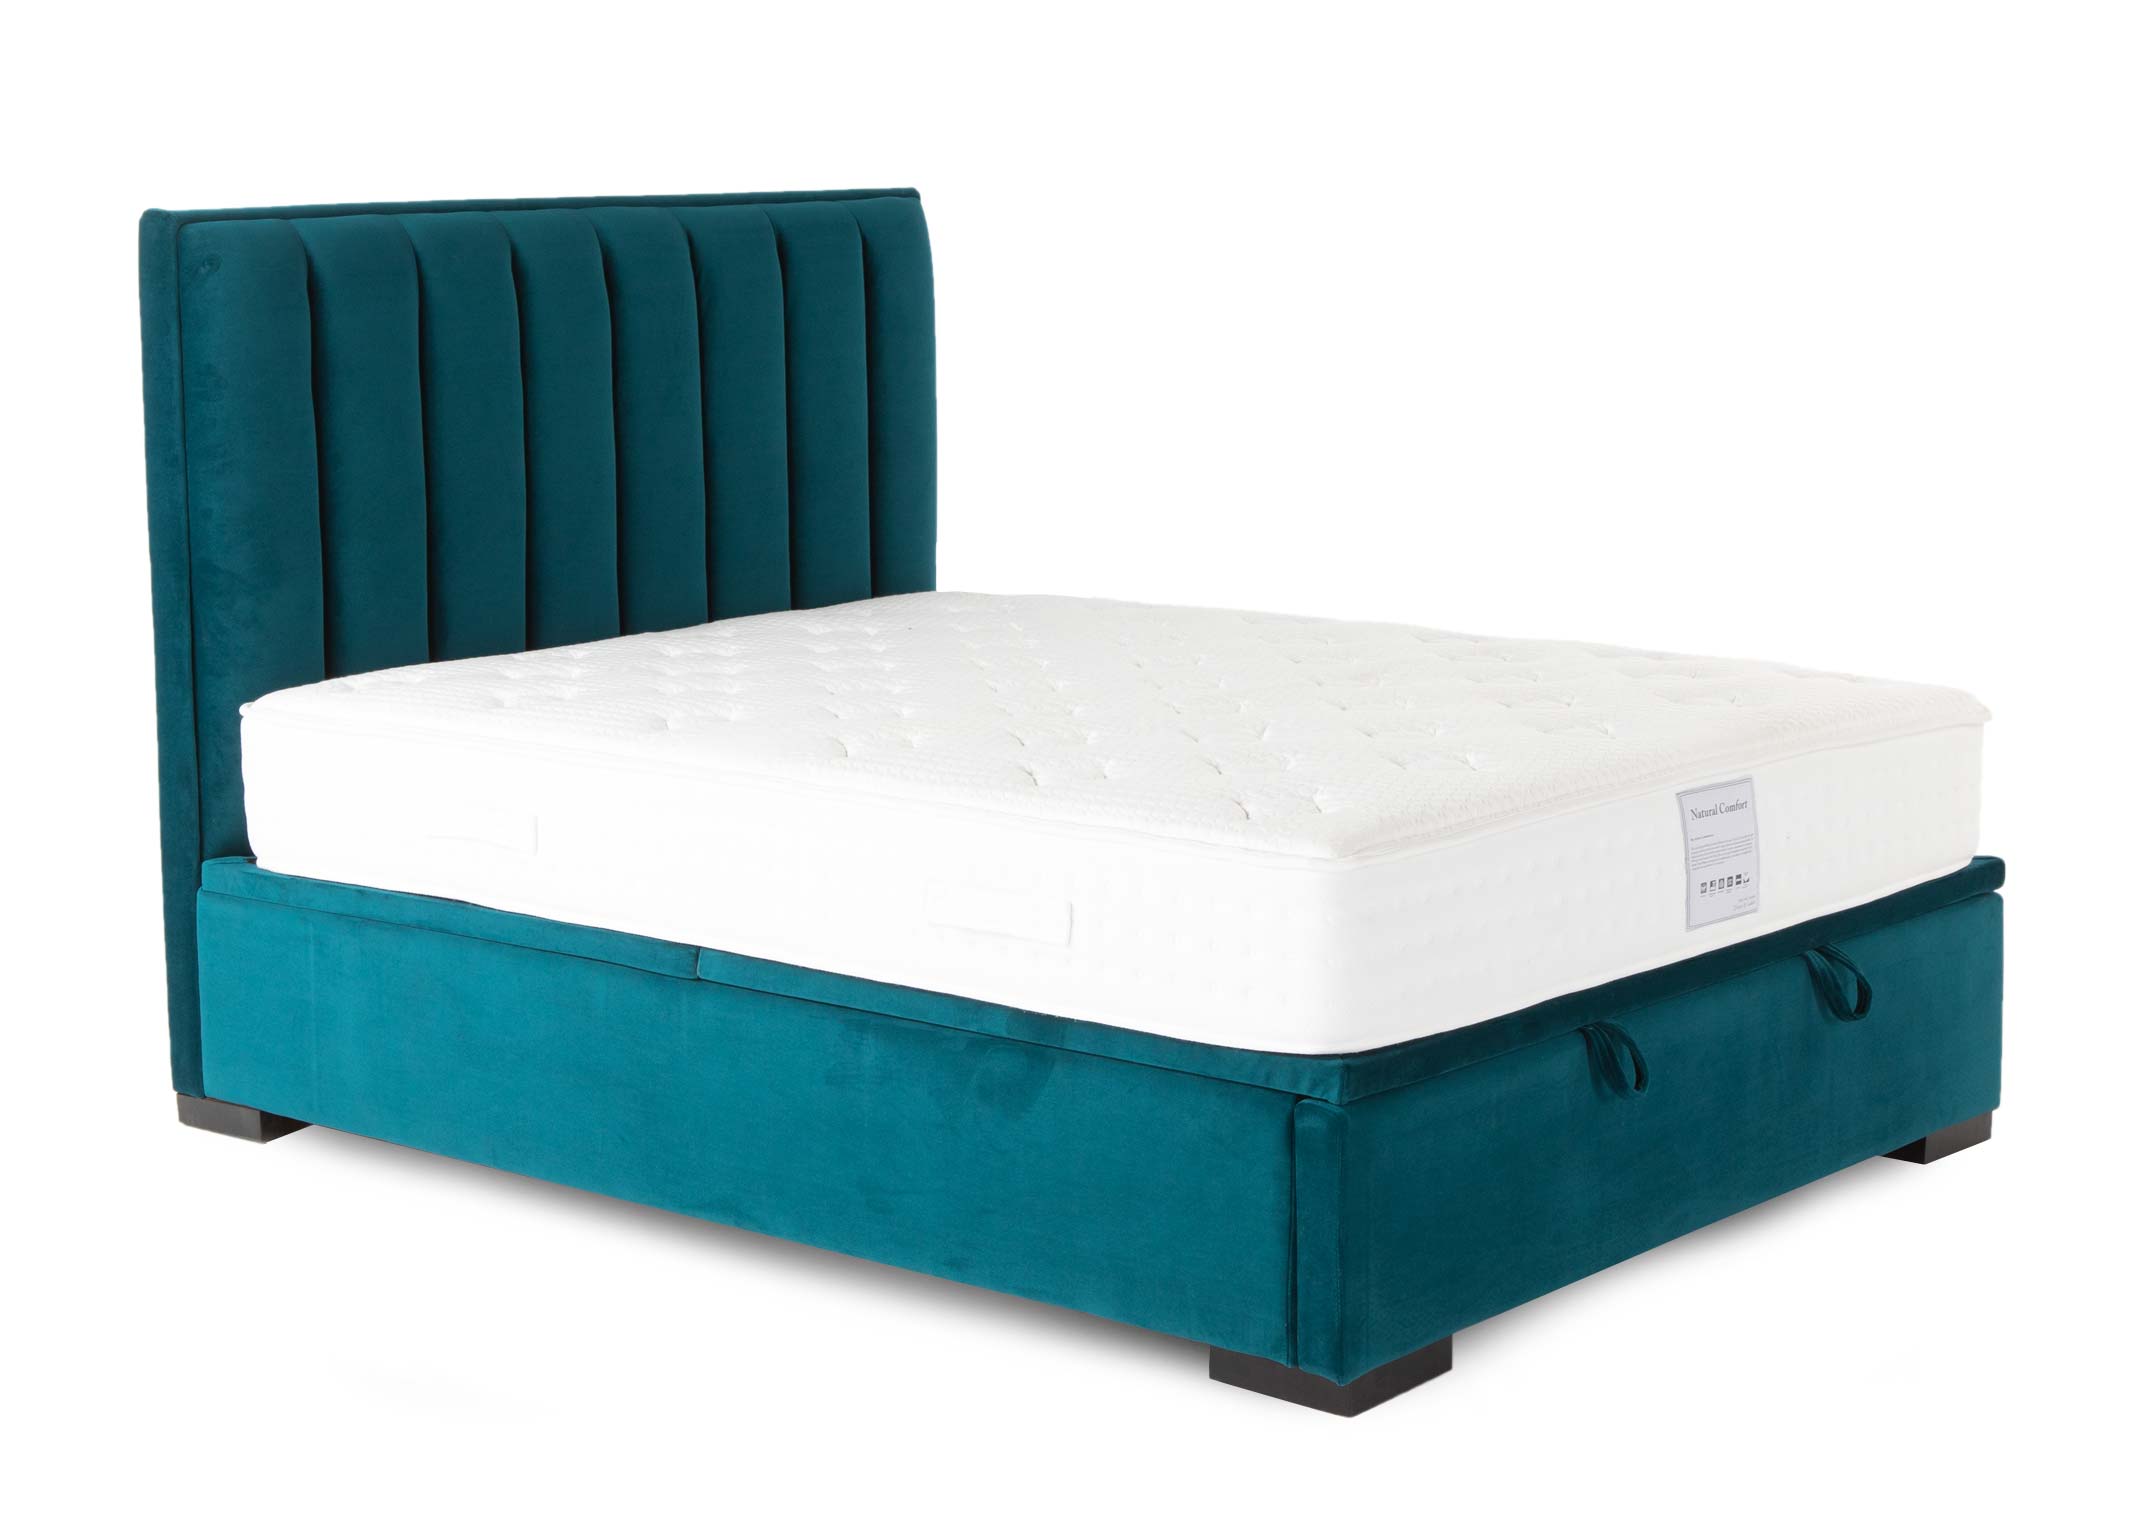 King Size 5ft Teal Velvet Ottoman Bed, Liberty King Size Bed